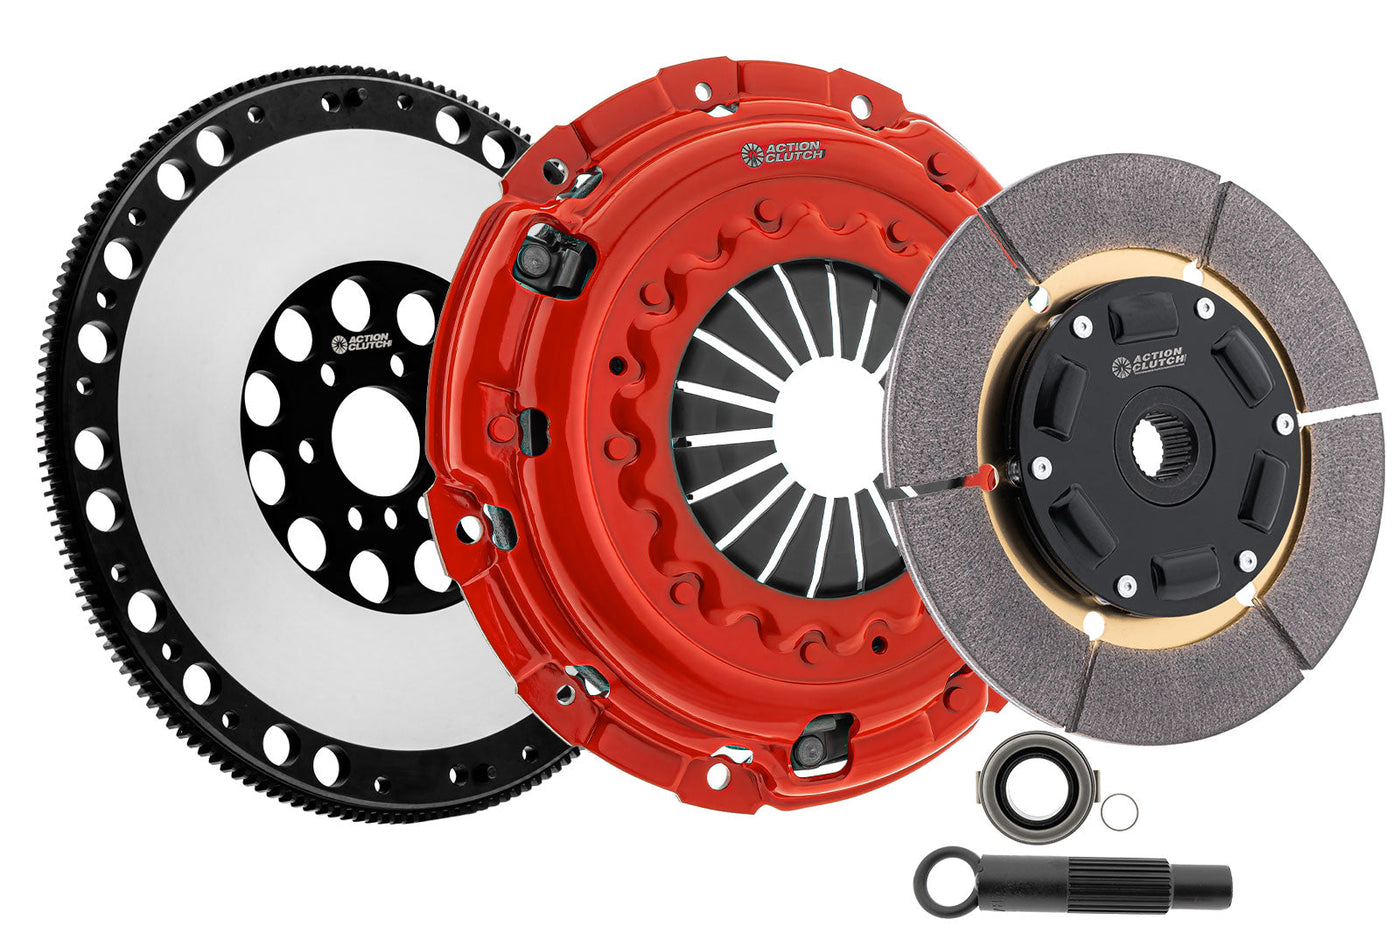 Ironman Sprung (Street) Clutch Kit for BMW 330i 2001-2003 3.0L DOHC (M54) 5 Speed Only RWD Includes Lightened Flywheel